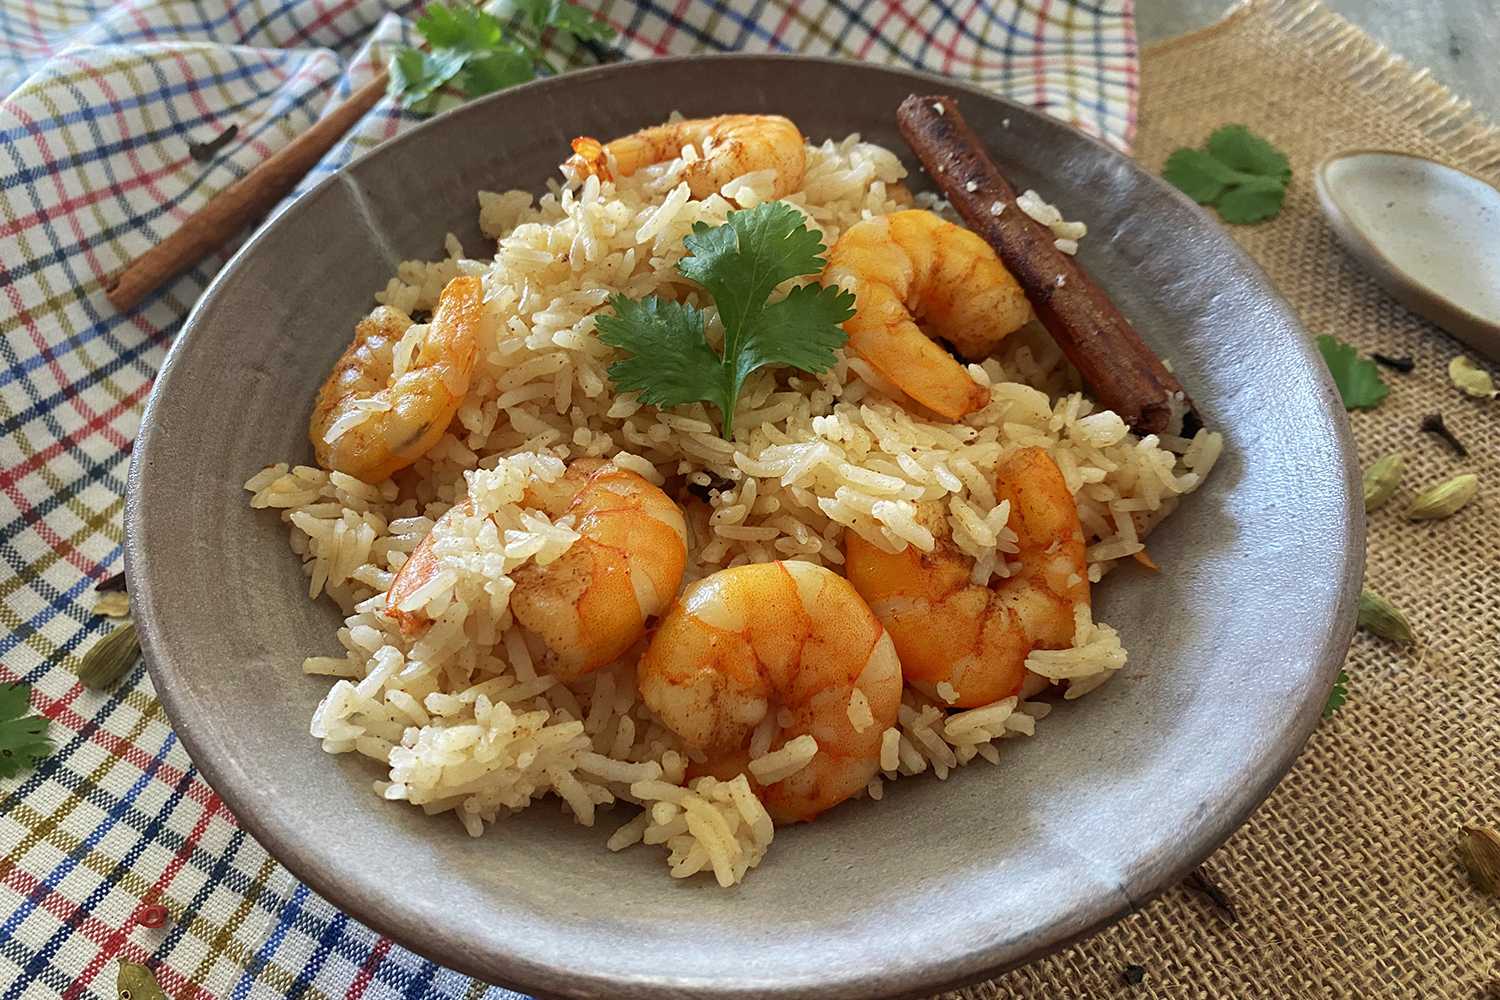 Jasmine rice with shrimp topped with parsley with cinnamon stick on side